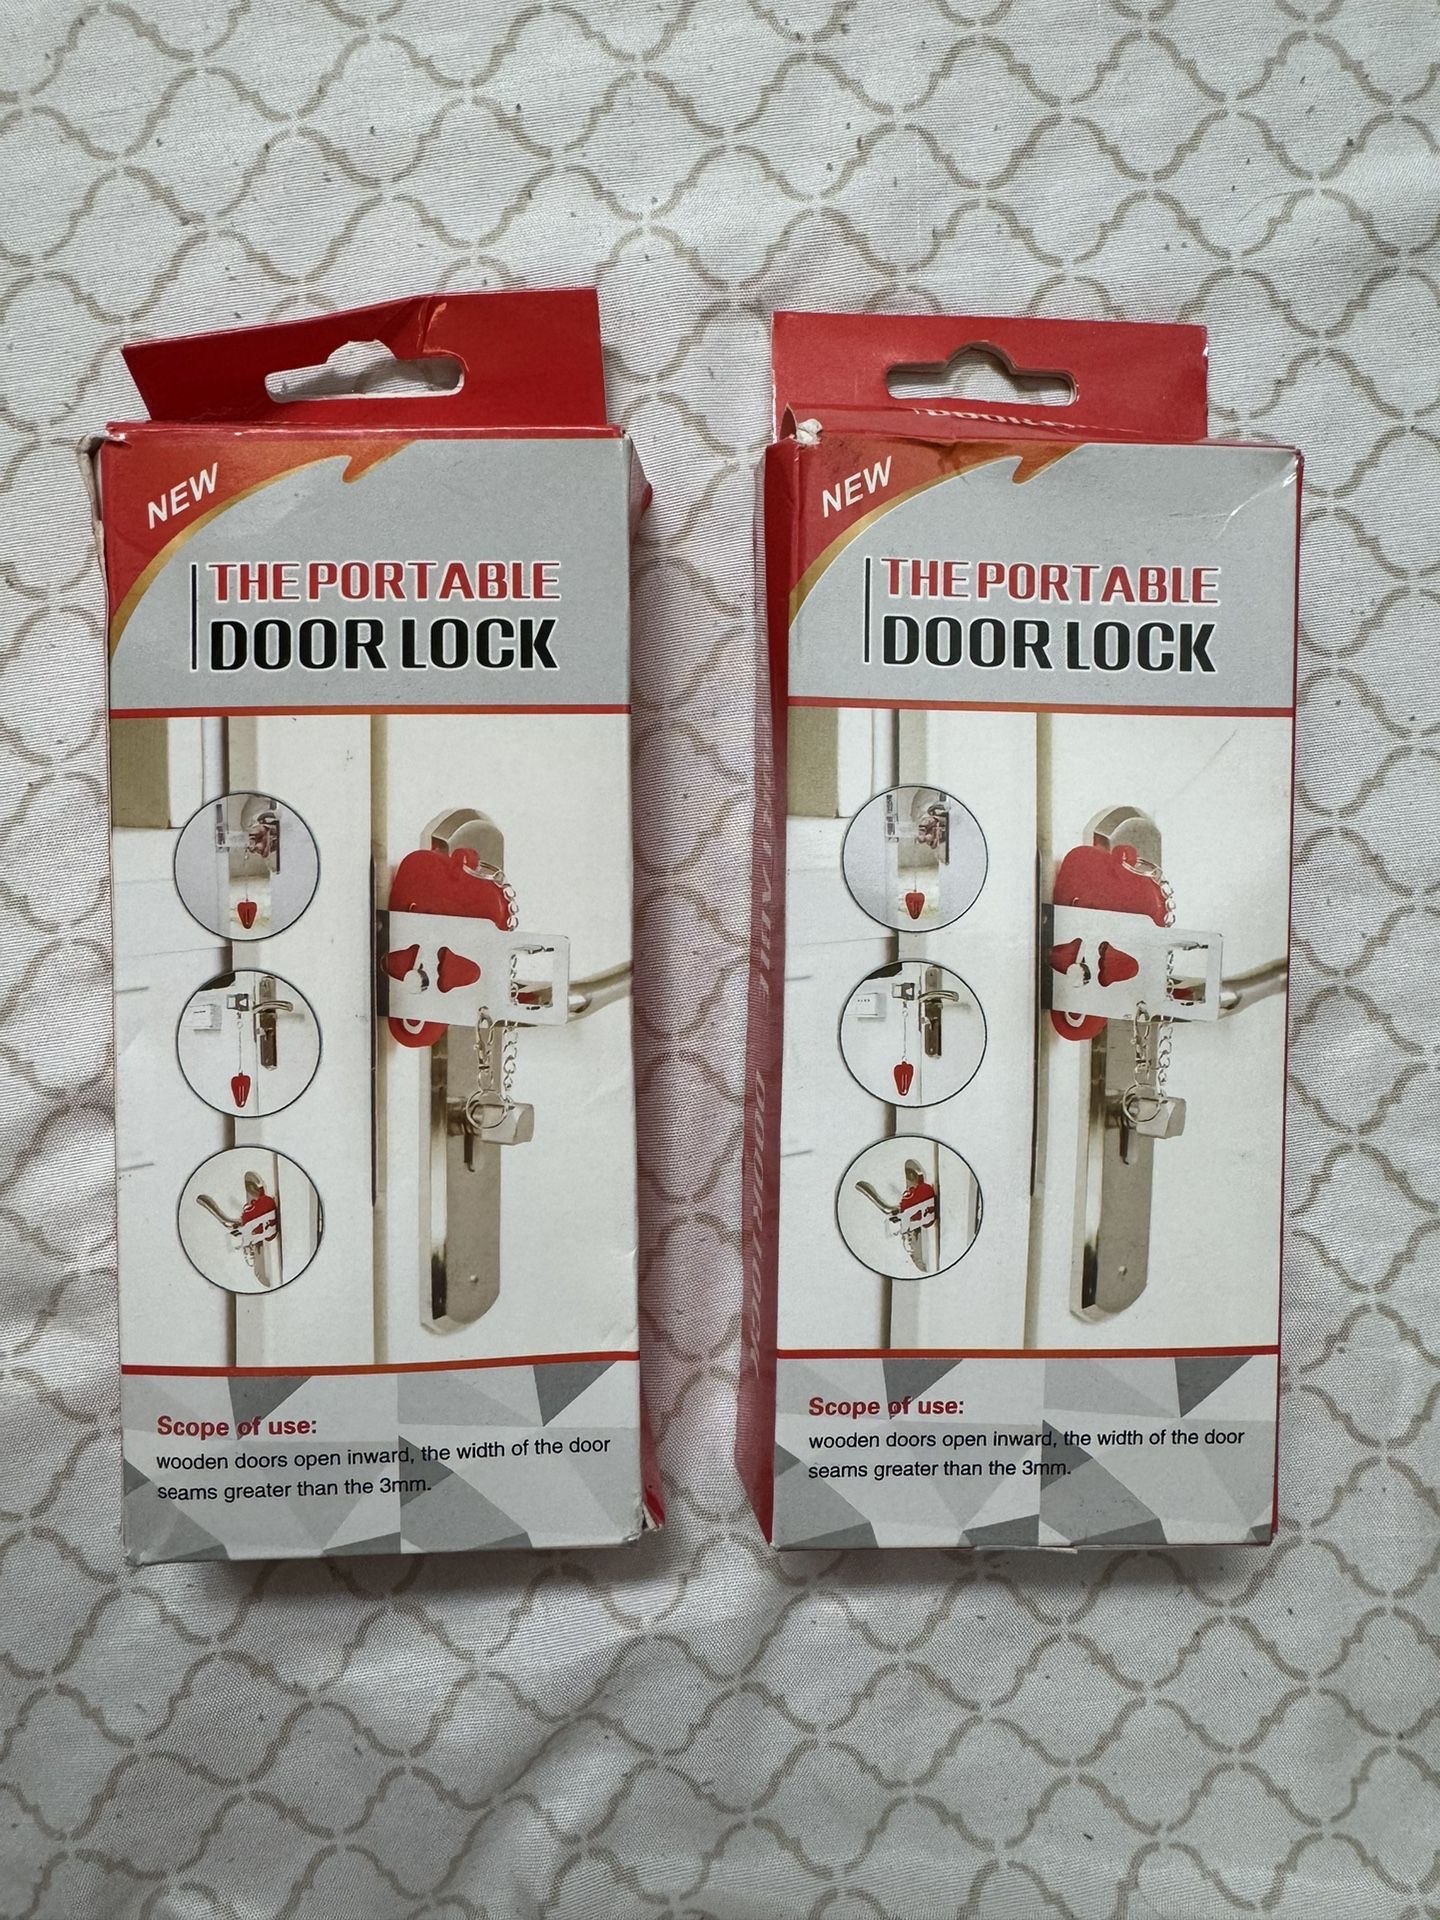 Brand New Portable Door Lock $6 Each OBO !!!ACCEPTING OFFERS!!!